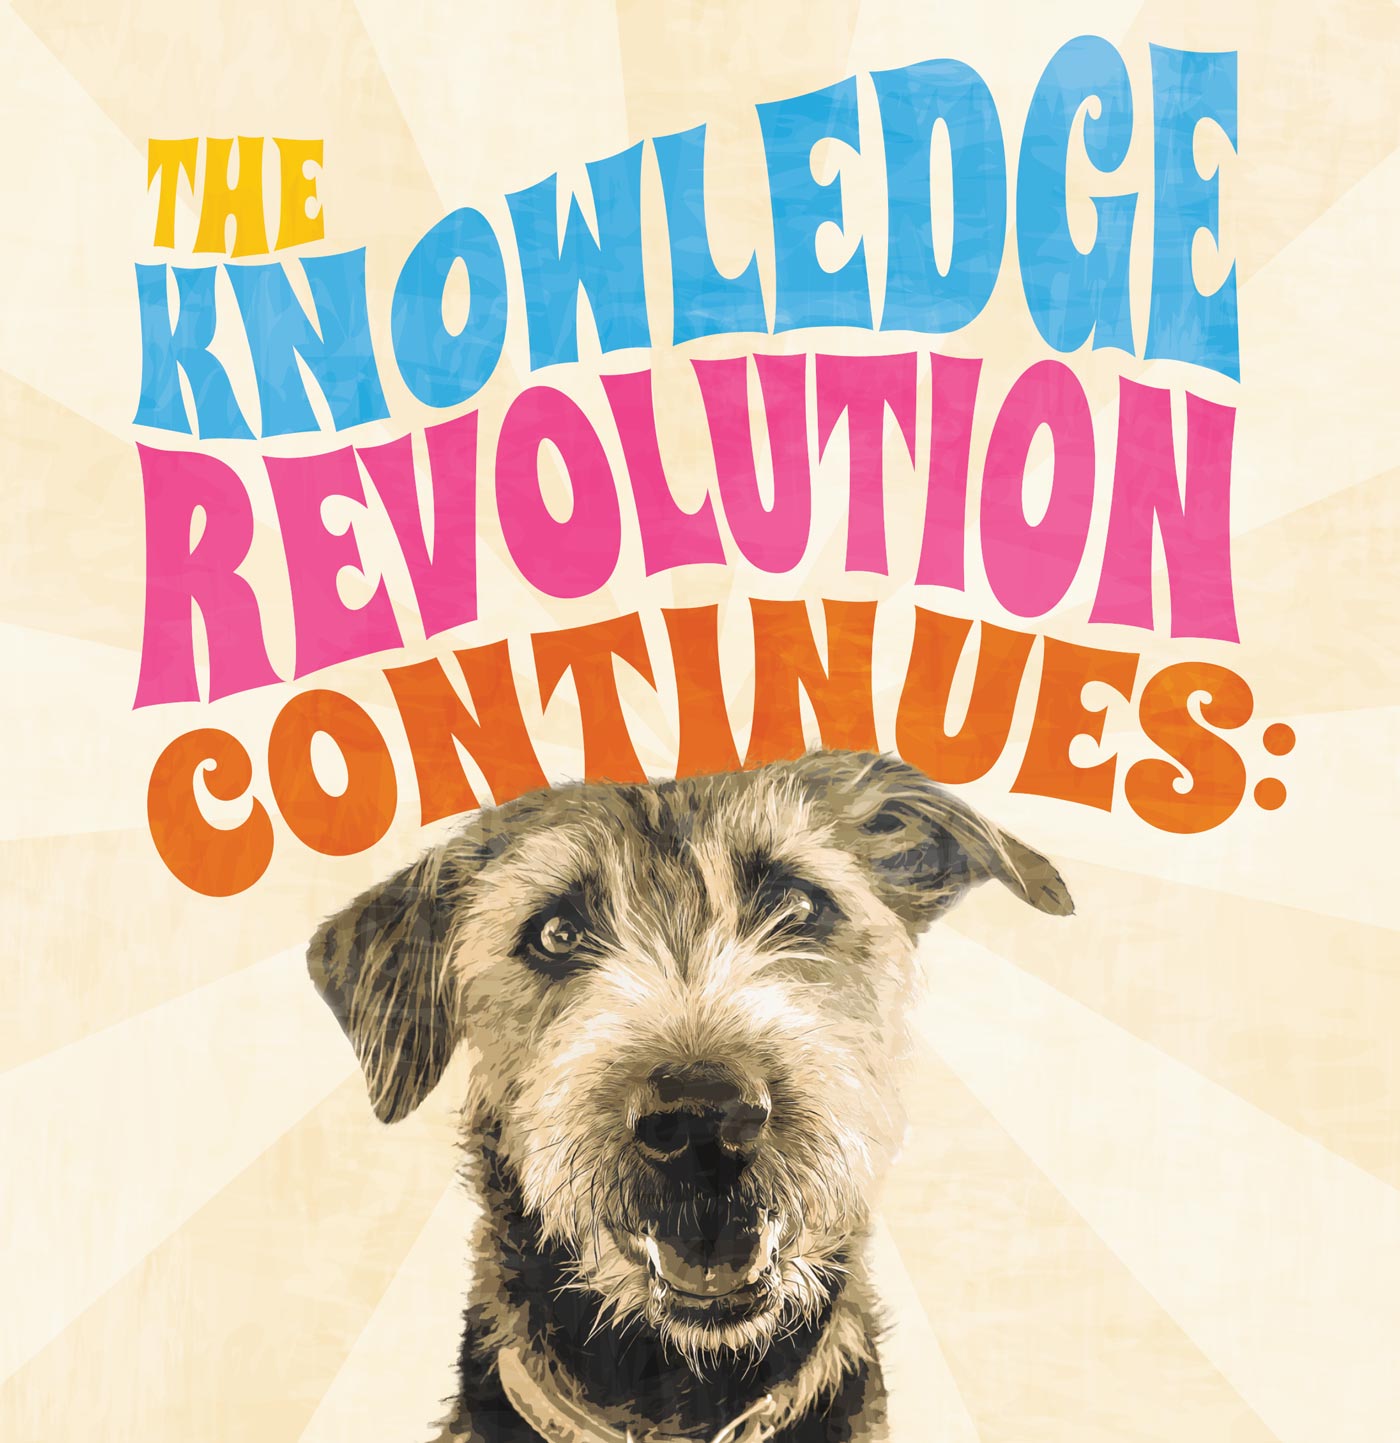 Image of dog and title "The Knowledge Revolution Continues:" in groovy vintage font